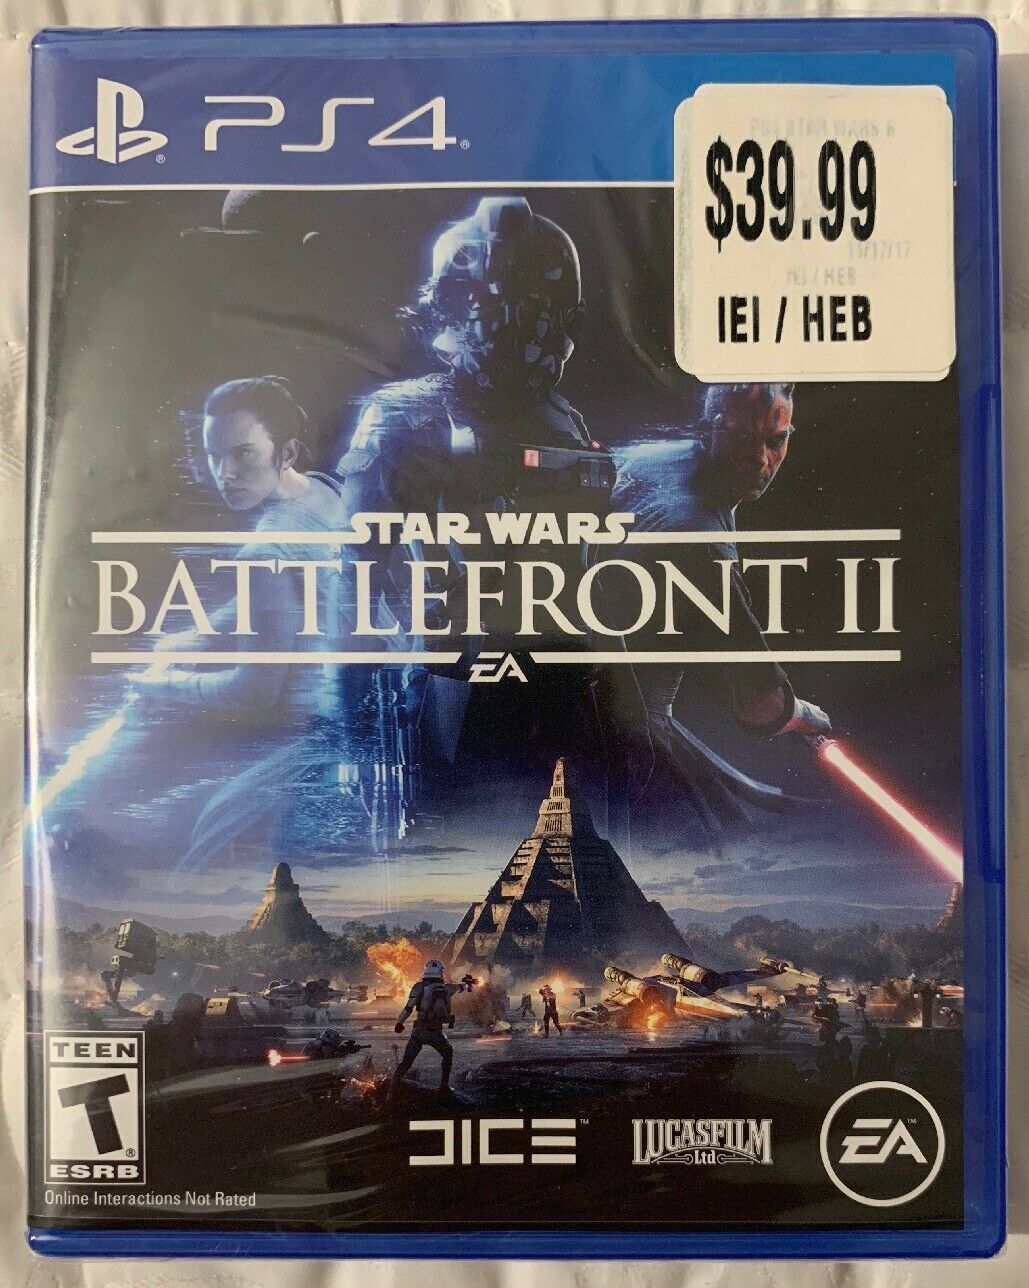 Star Wars: Battlefront II (Playstation 4) Brand New Factory Sealed Free Shipping - $18.38